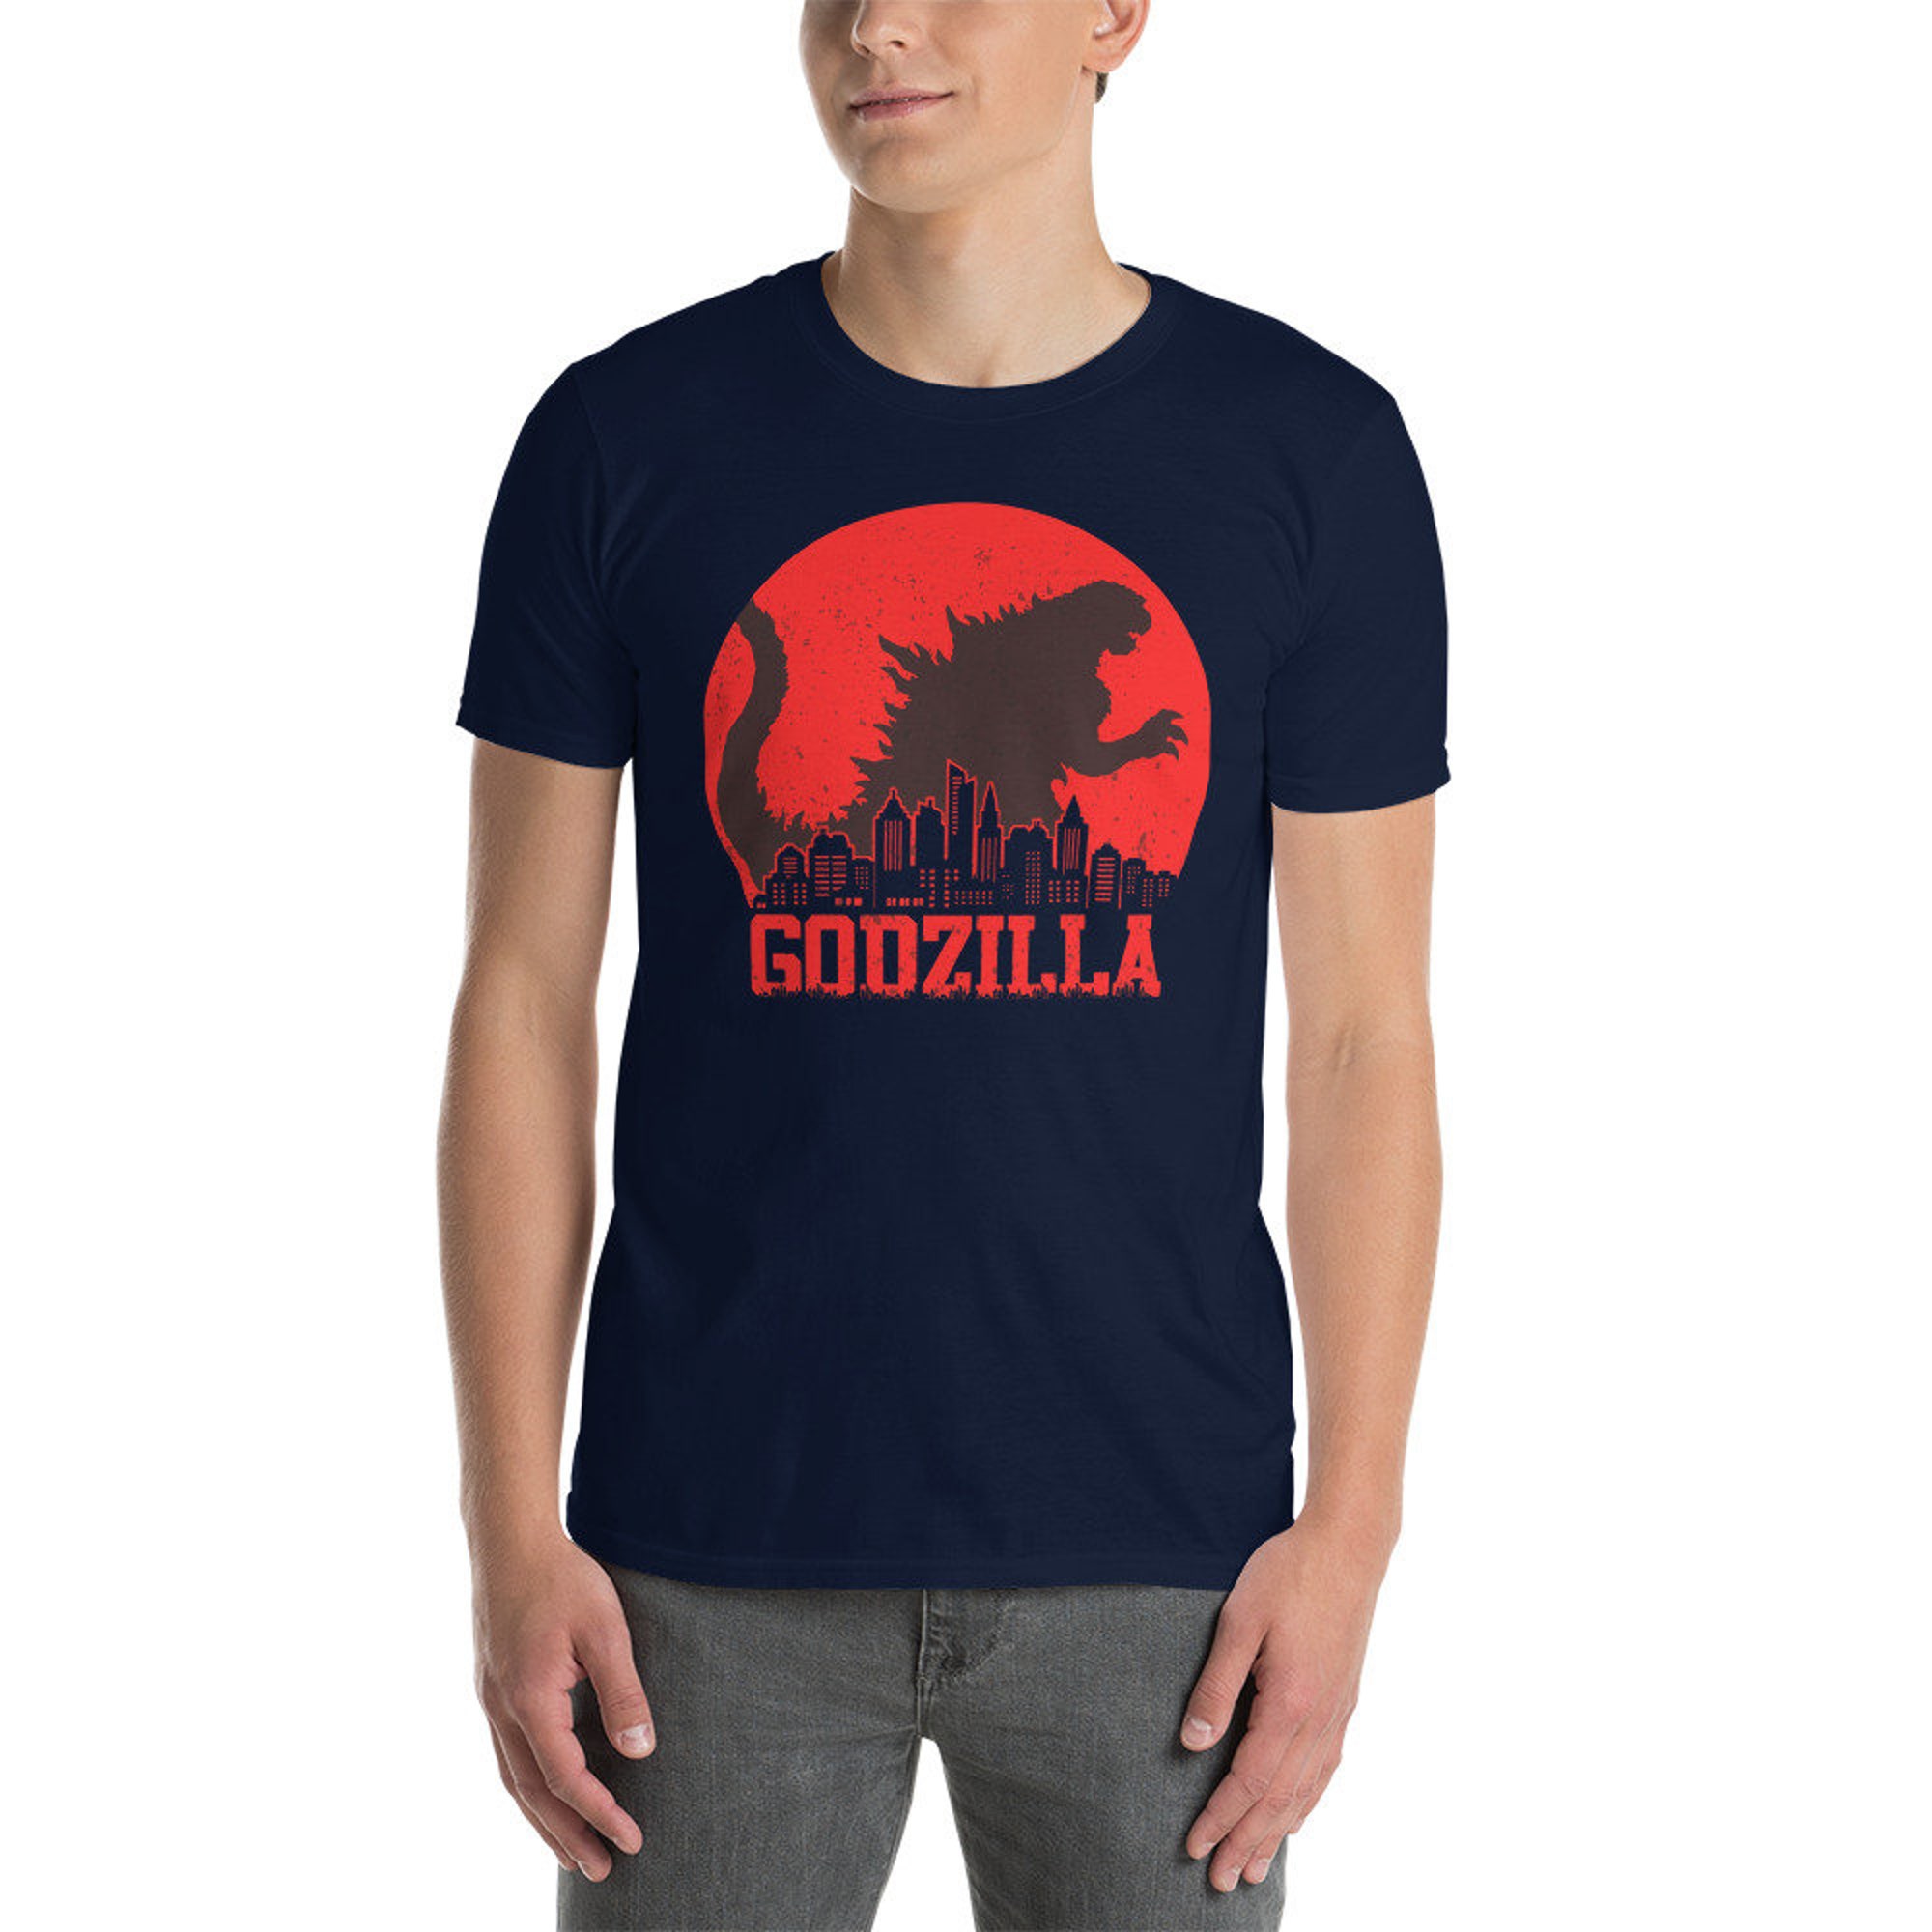 Discover Godzilla T-Shirt, Cool Japanese Kaiju Movie Monster Shirt, King of the Monsters, Adult Birthday Gift Tee, Unisex T Shirt for Men & Women